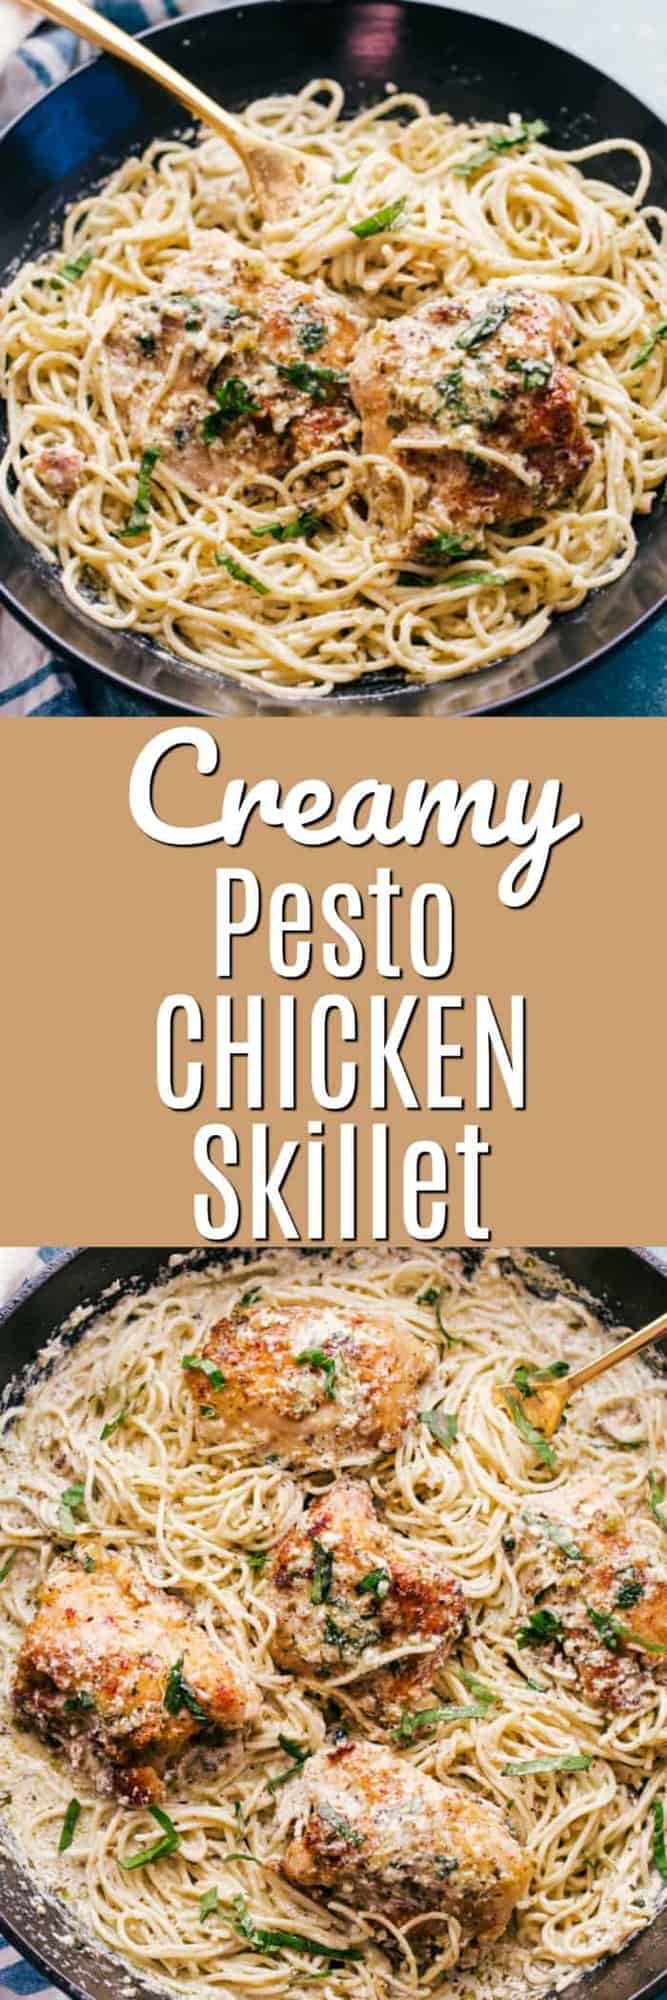 A Pinterest images or creamy pesto chicken in a skillet